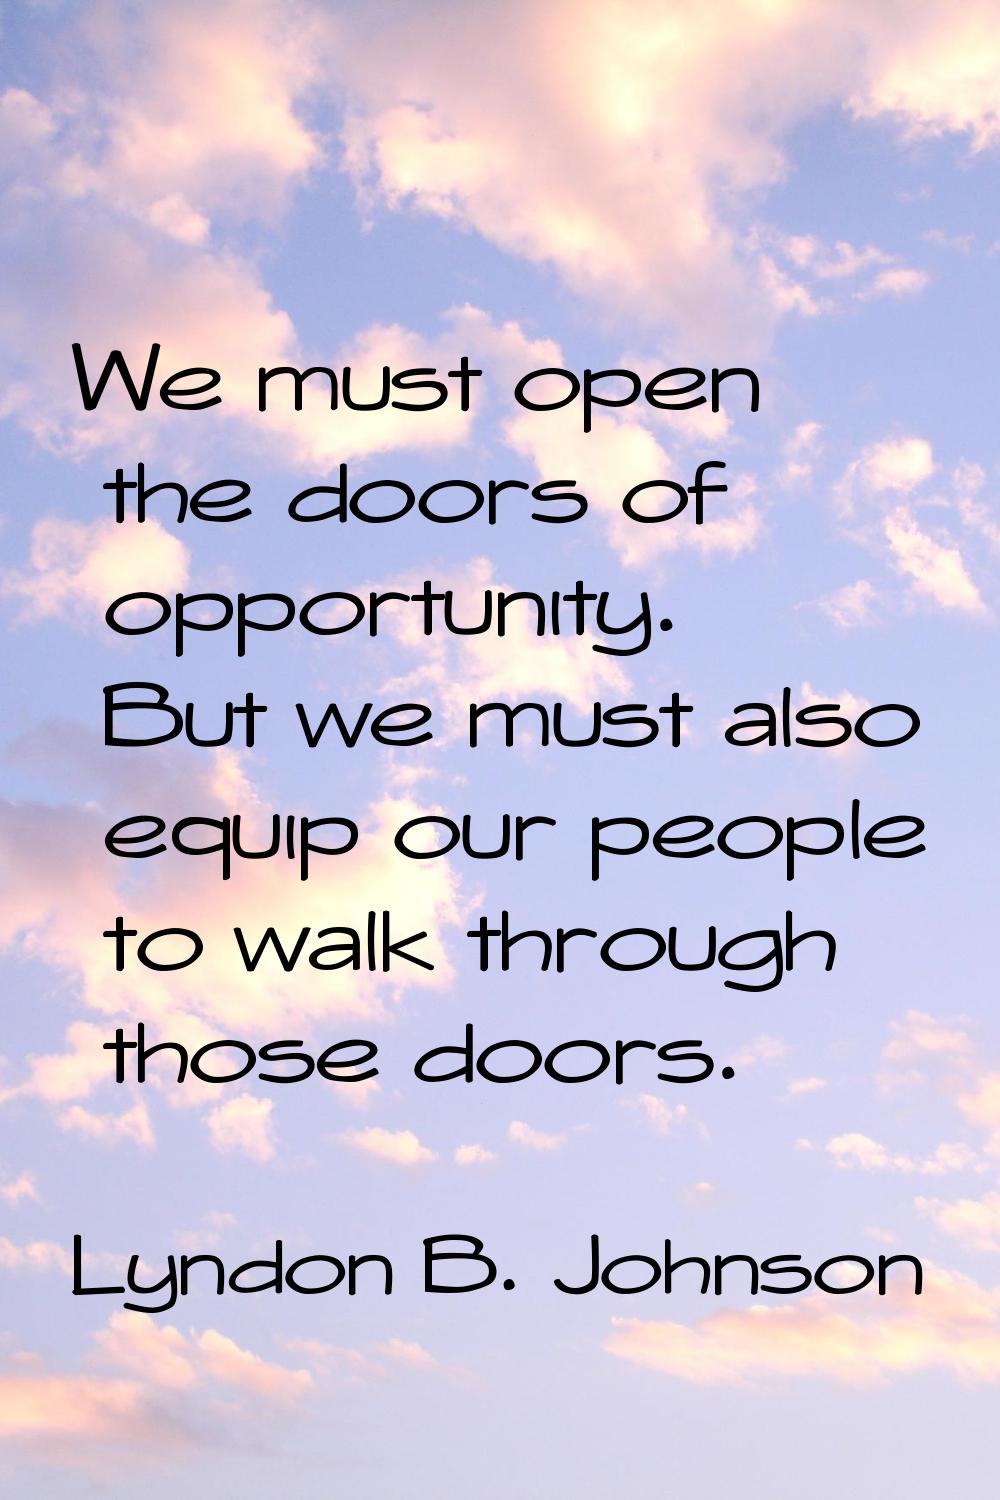 We must open the doors of opportunity. But we must also equip our people to walk through those door